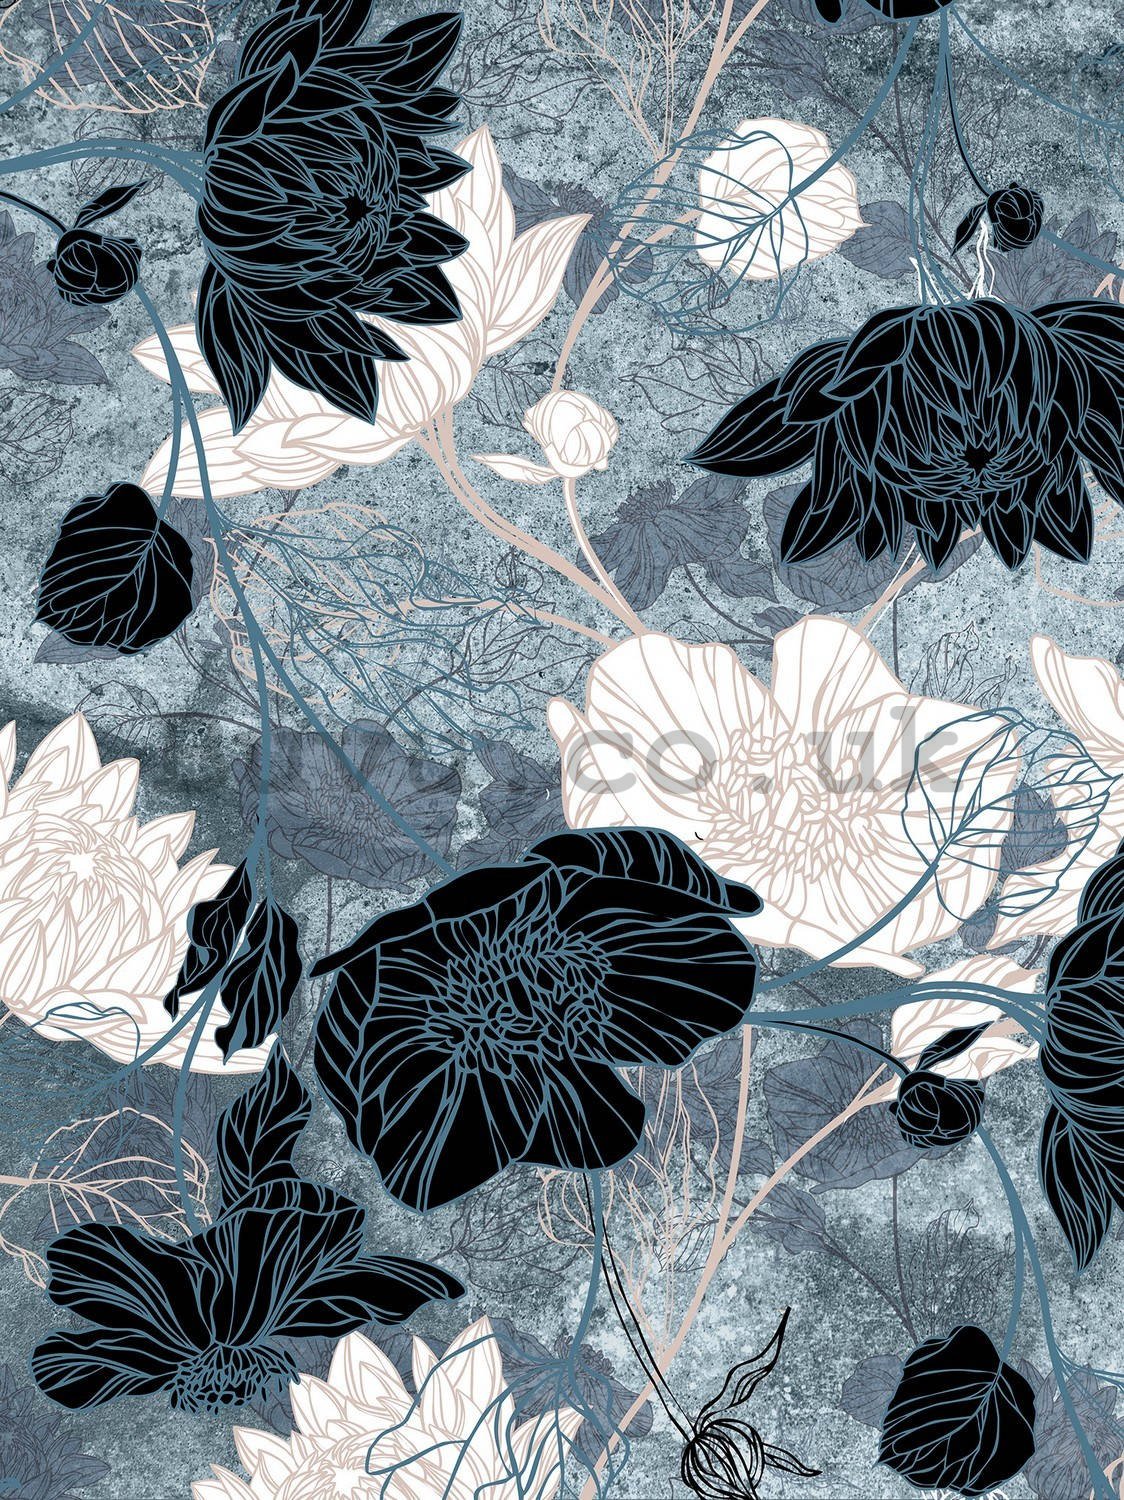 Wall mural: Painted flower combination (1) - 184x254 cm